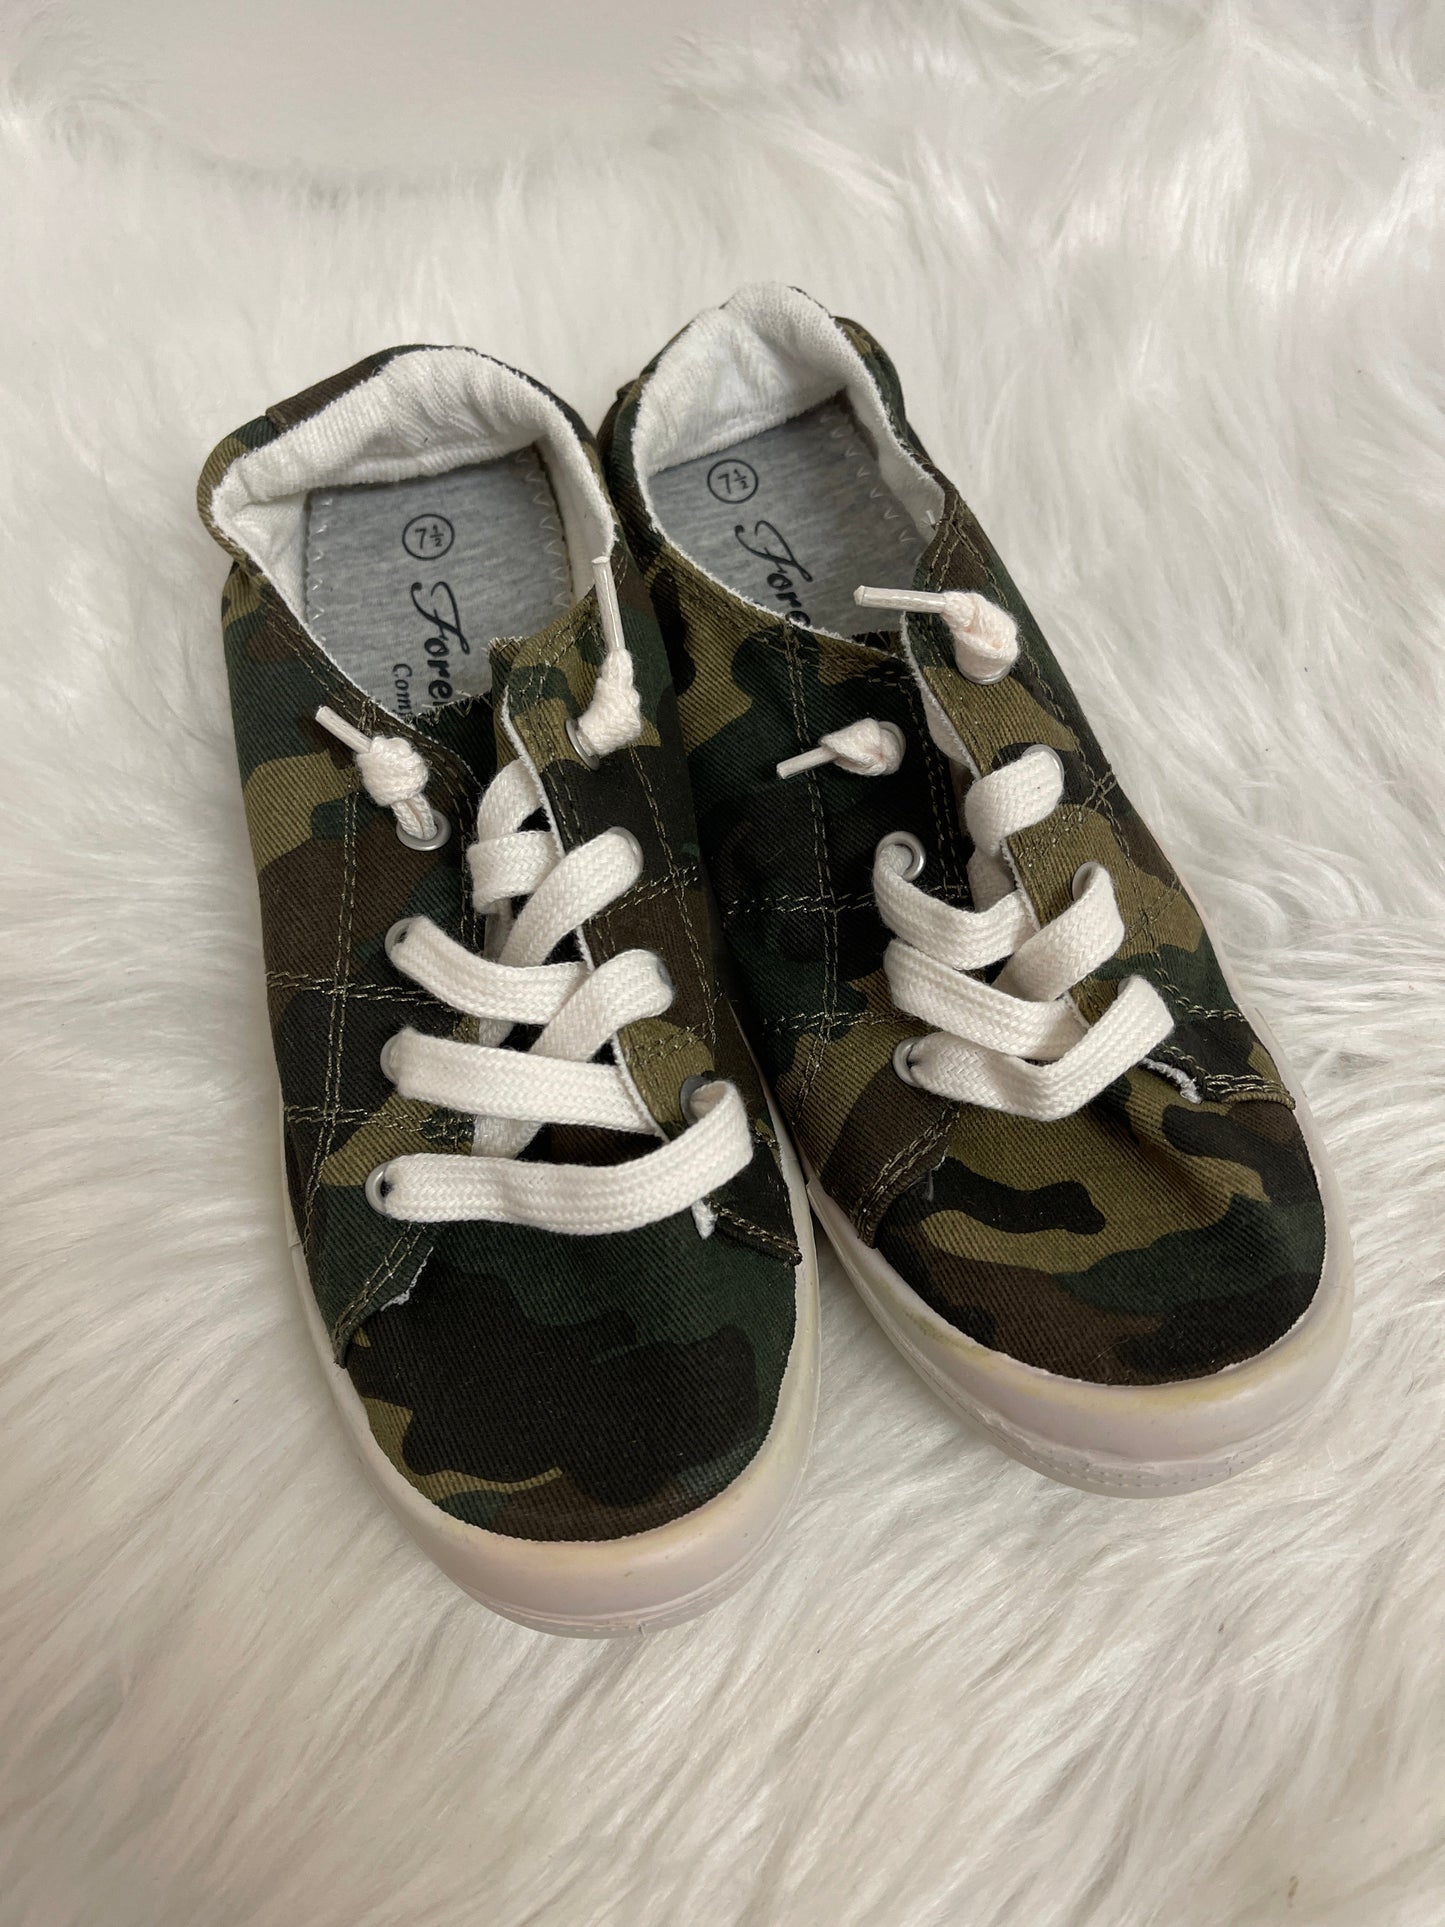 Camouflage Print Shoes Sneakers Forever, Size 7.5